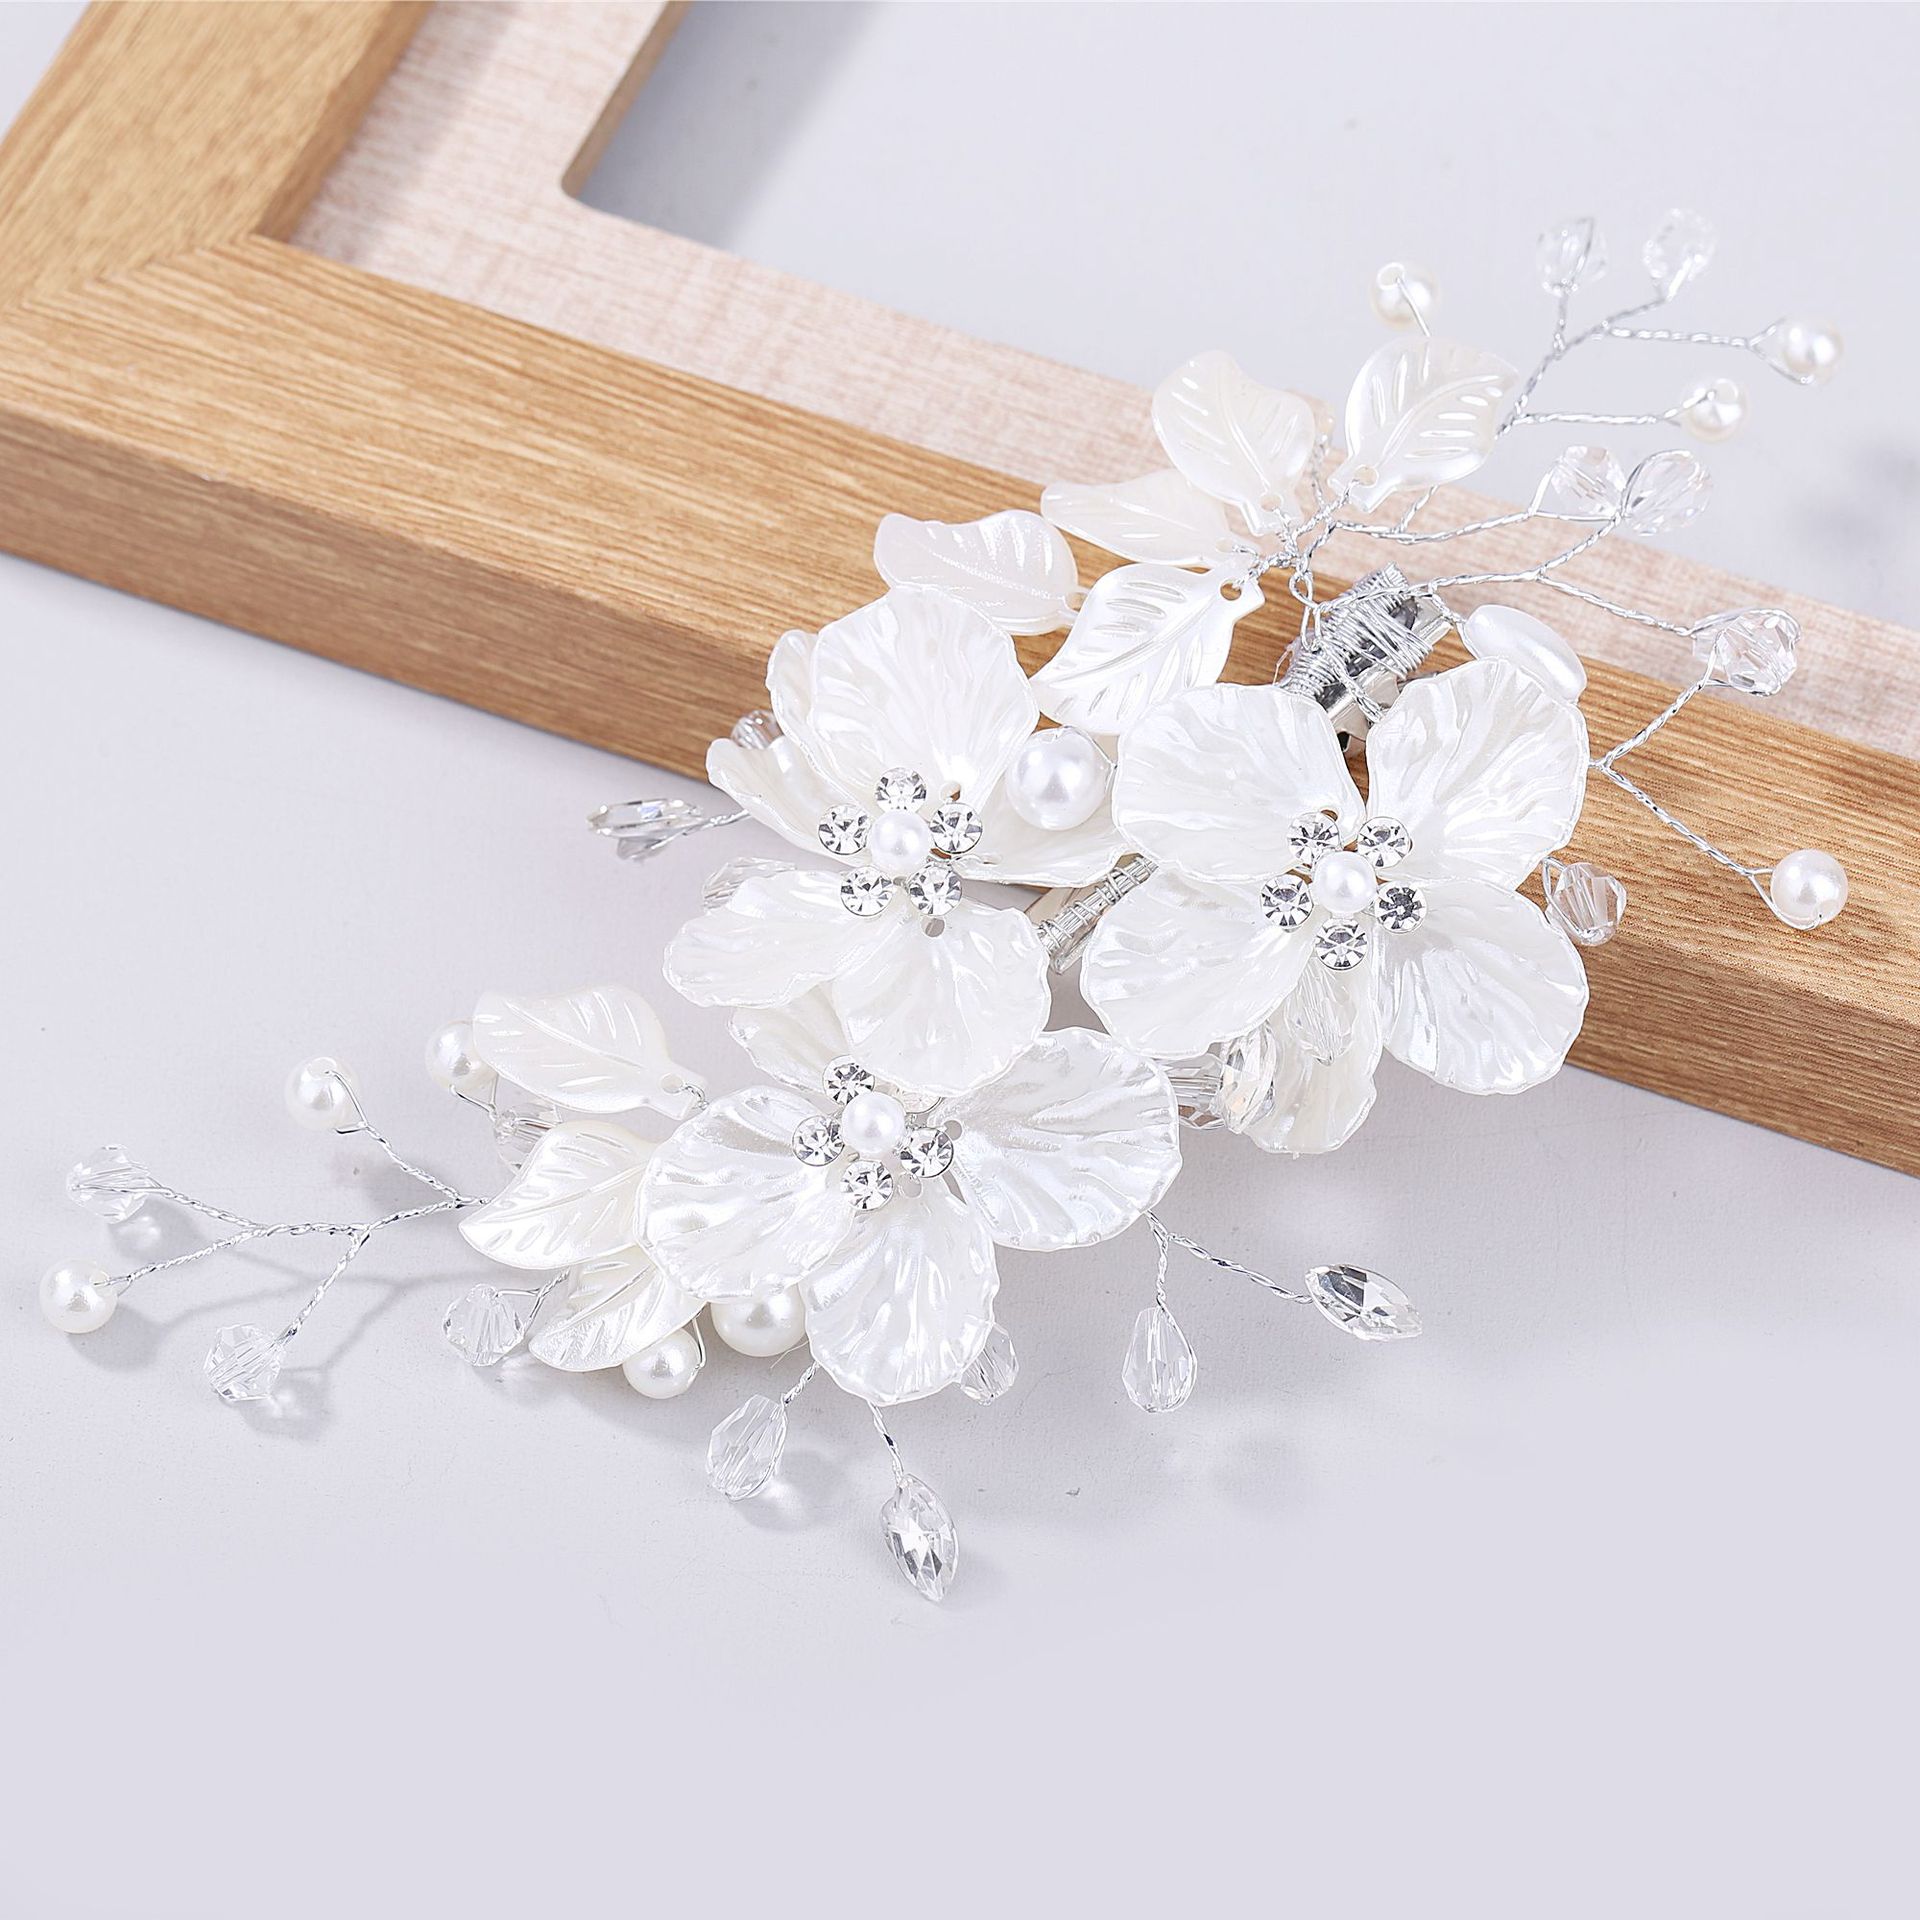 Silver thread with white flowers